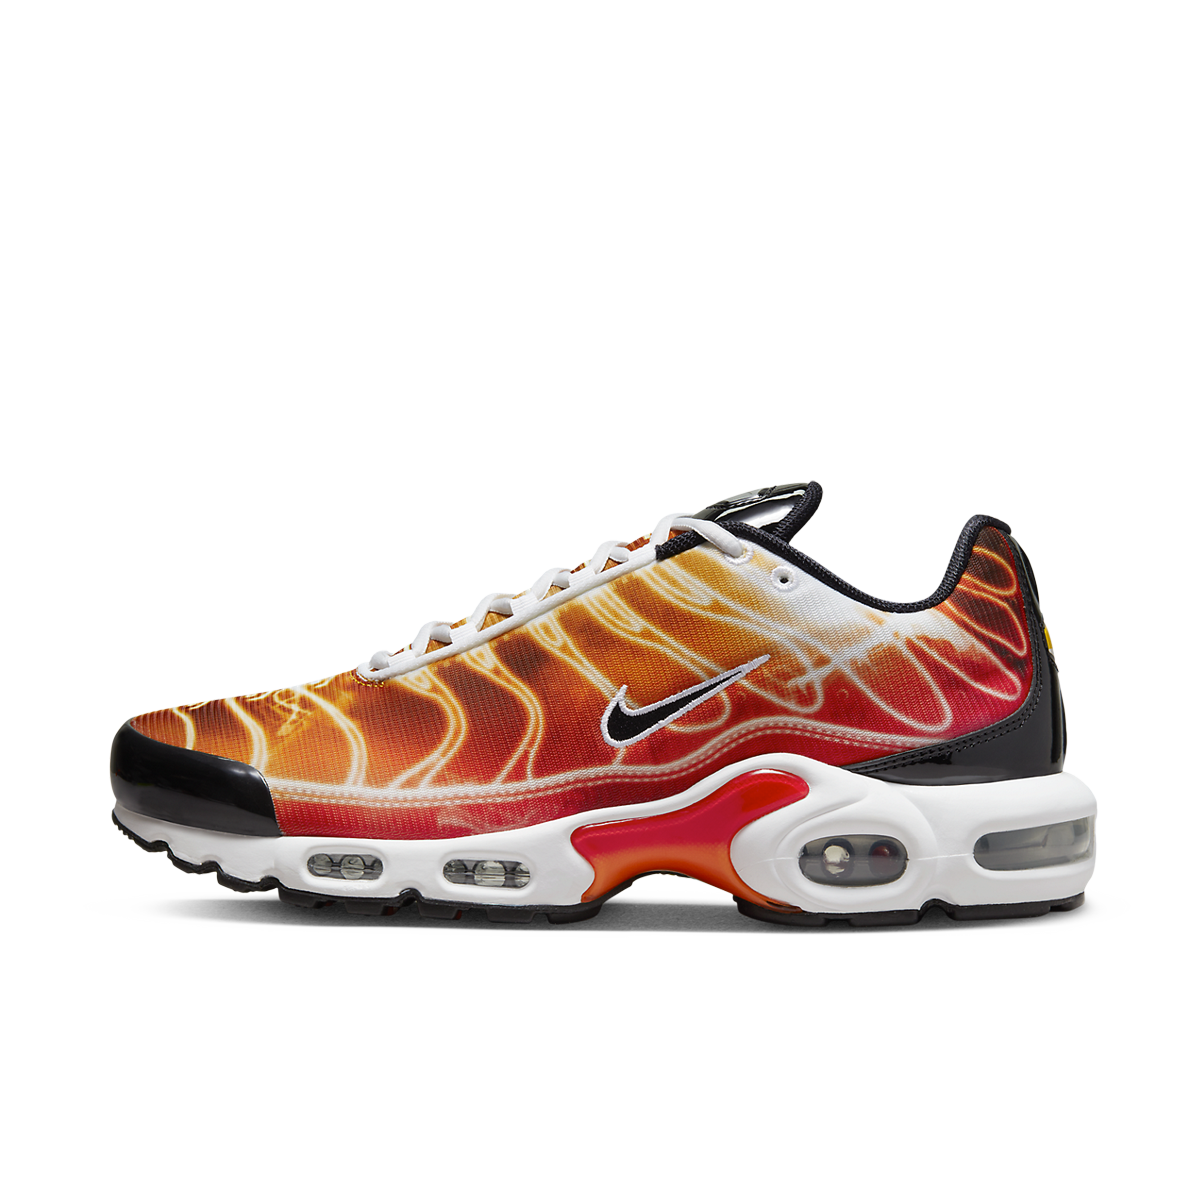 Air Max Plus "Light Photography"